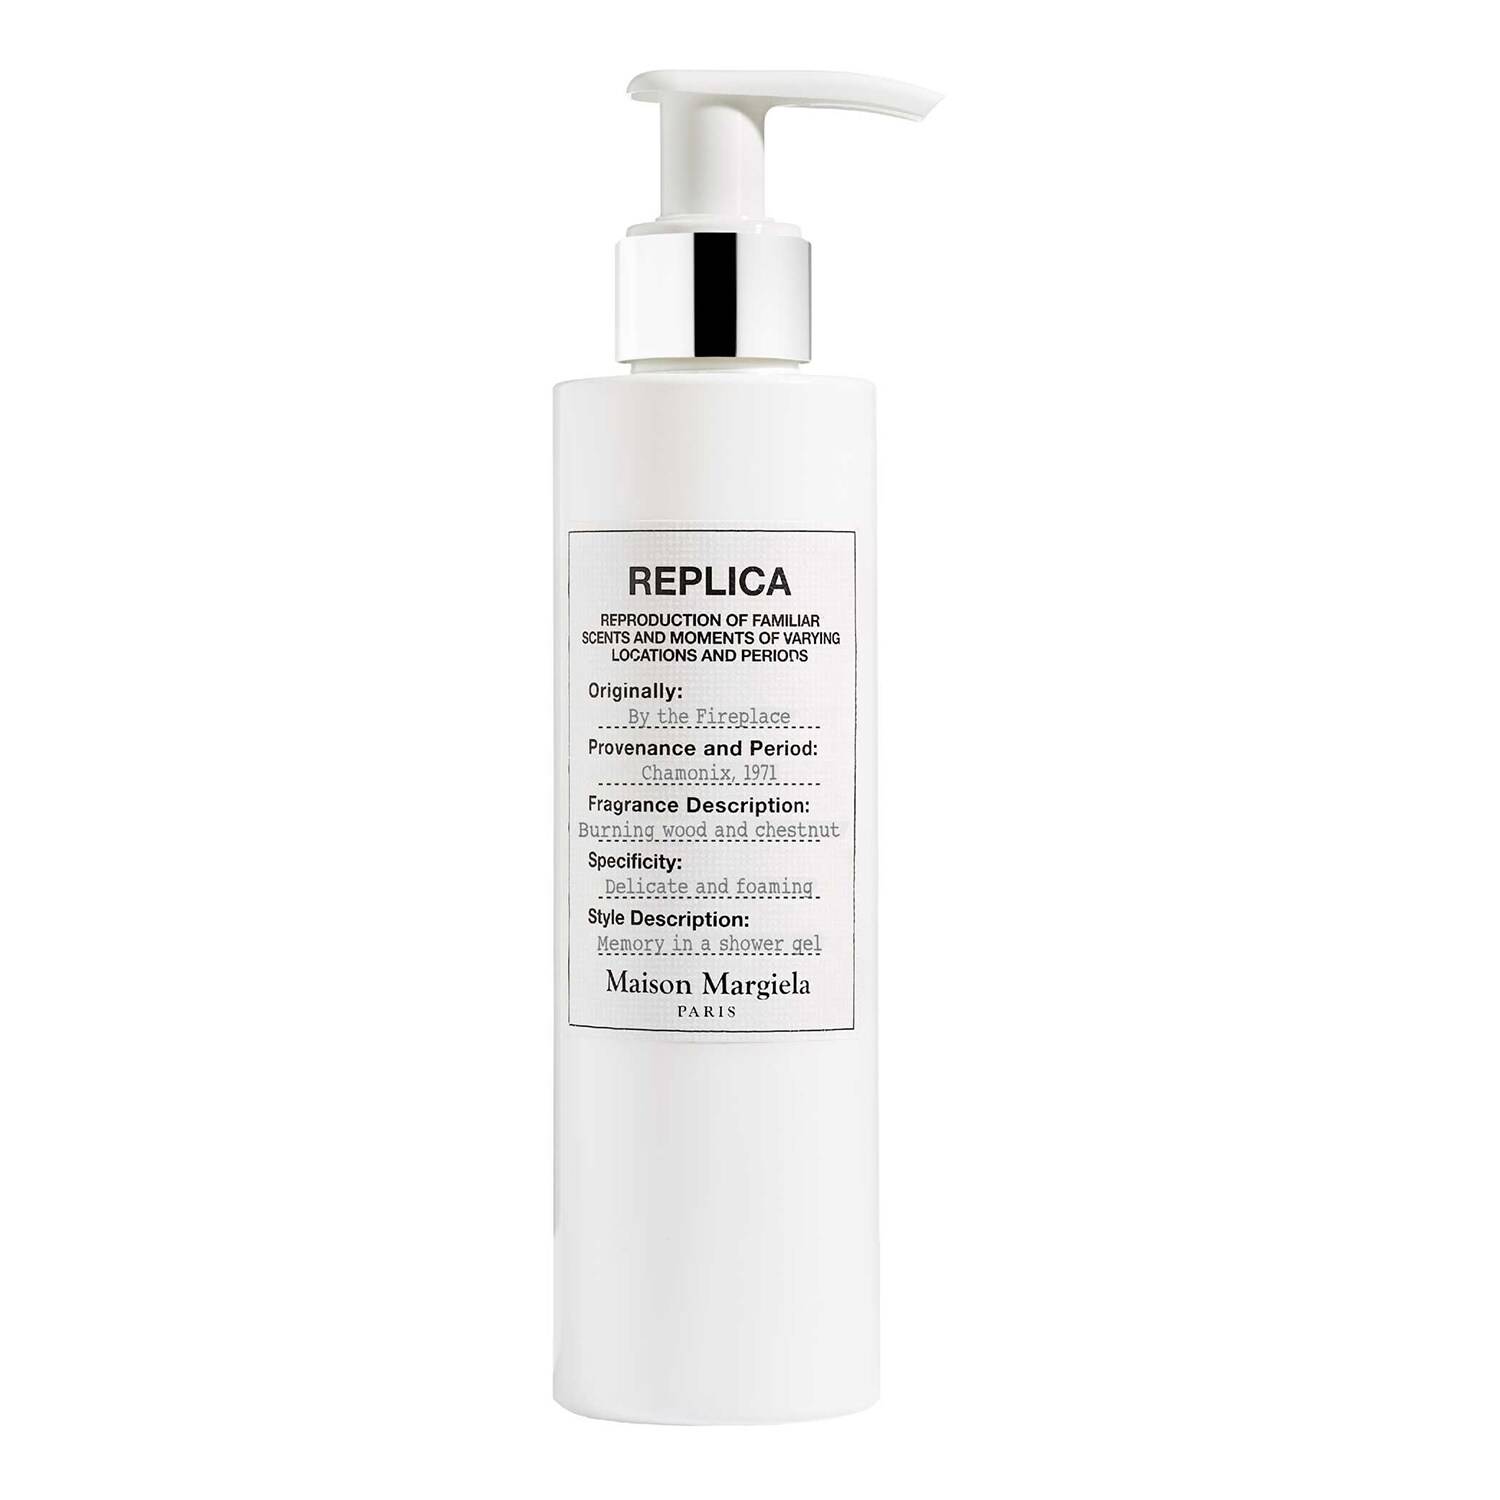 Maison Margiela Replica By The Fireplace Shower Gel - Sephora Exclusive 200Ml